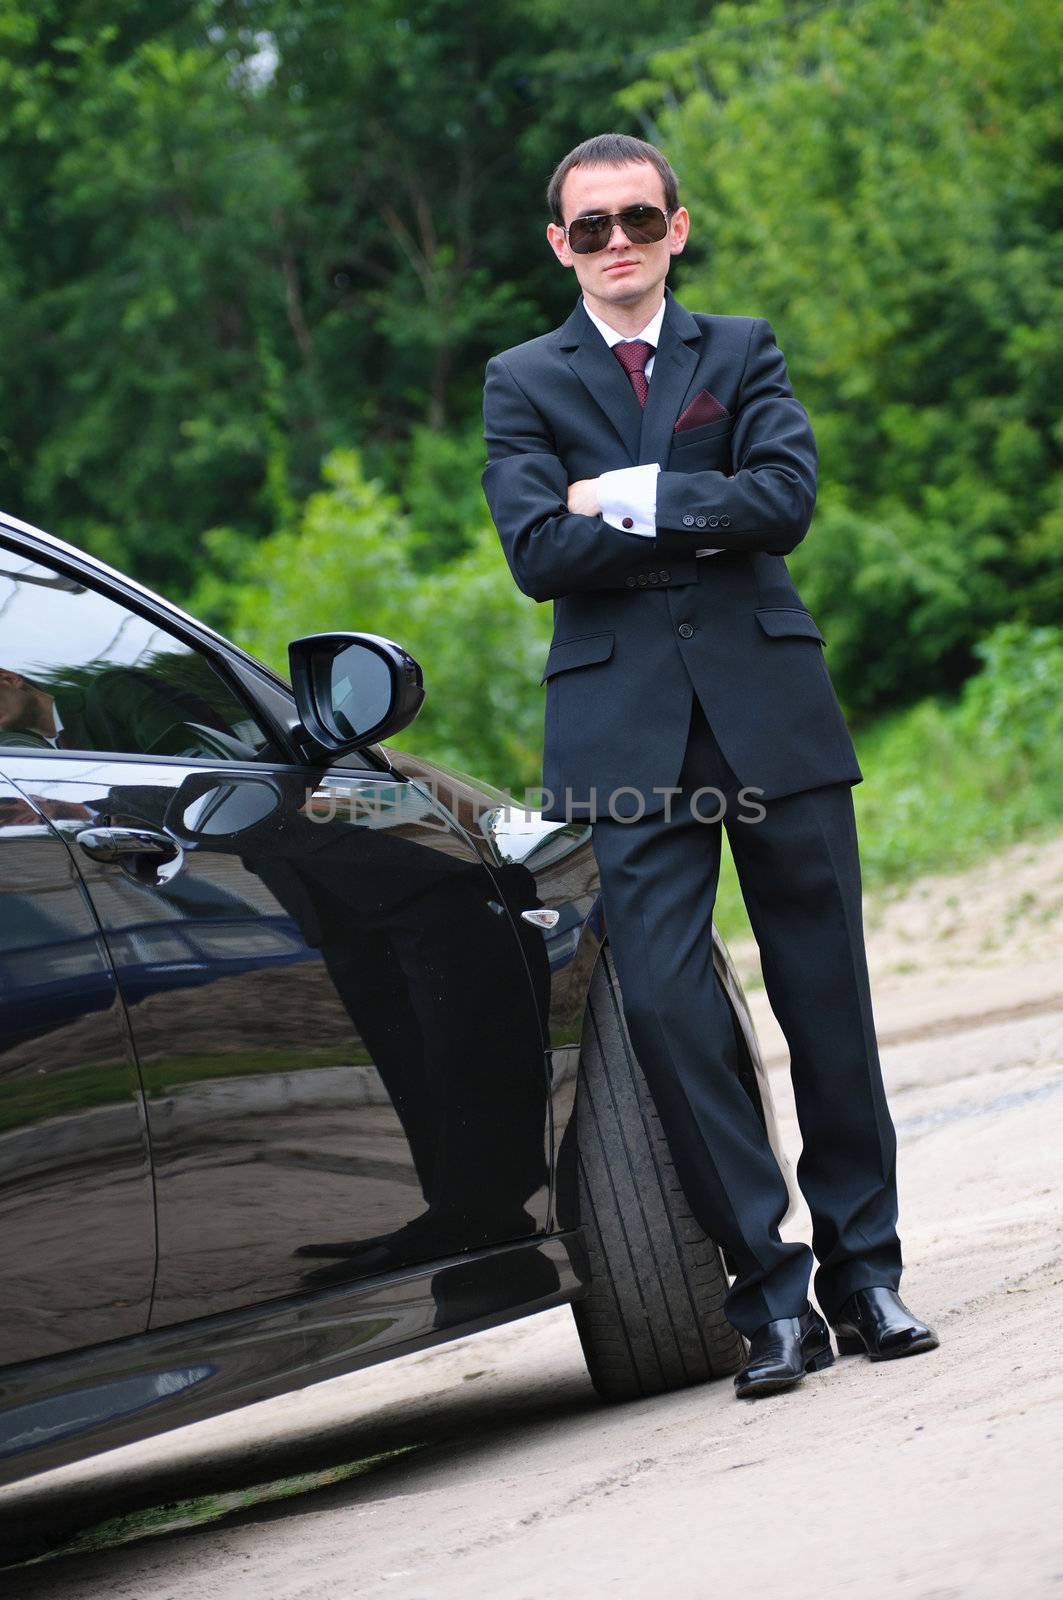 The young man with glasses and suit stand near to expensive car by docer2000